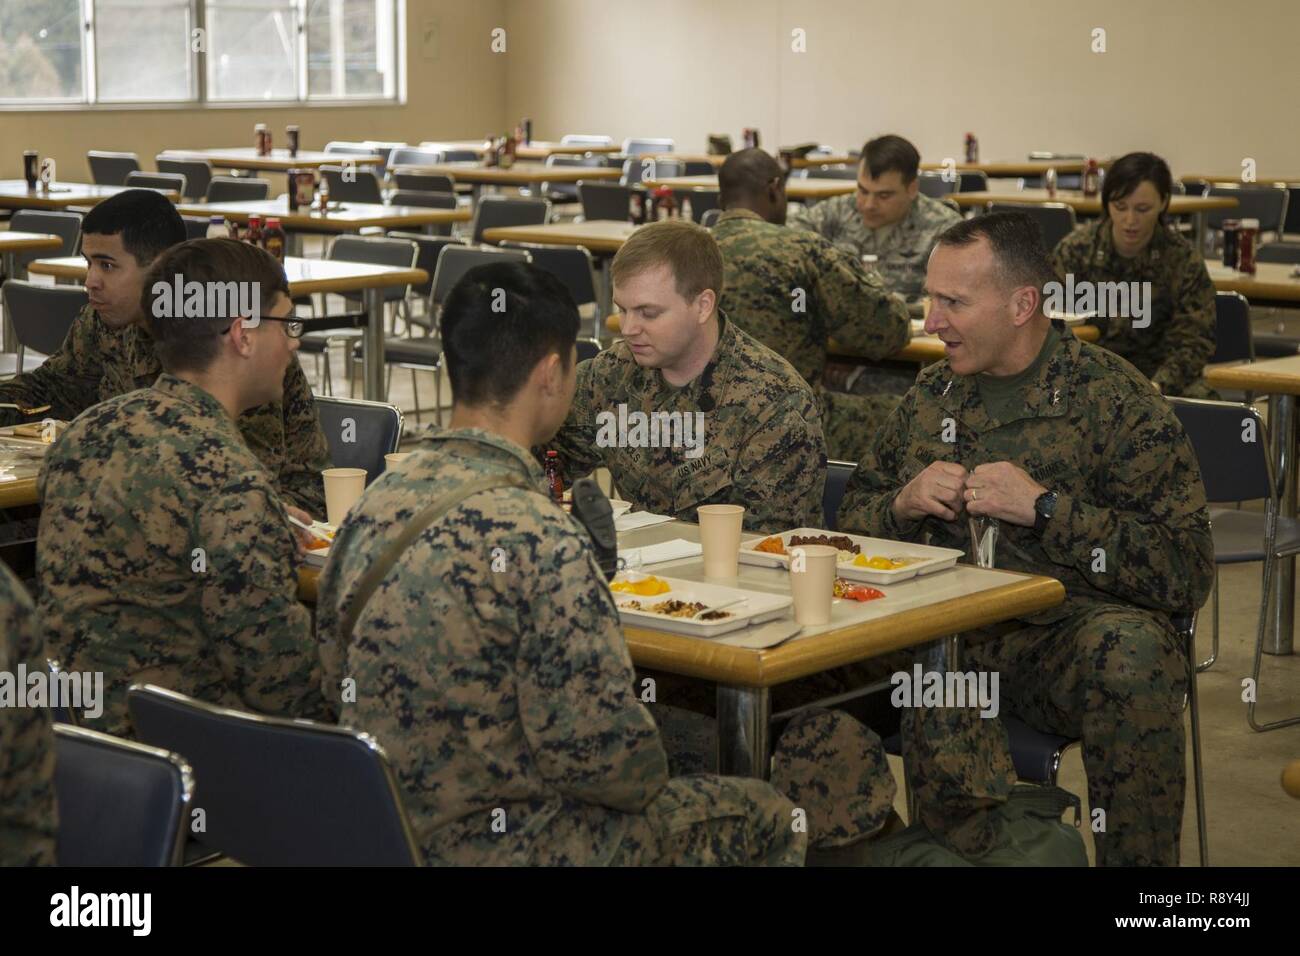 U.S. Marines with Headquarters Battery, 3rd Battalion, 12th Marines eat food at the chow hall in the Hijudai Maneuver Area, Japan, March 6, 2017. Marines and sailors participate in the artillery relocation training program to provide timely and accurate fires to sustain military occupational specialty skills, train Marines/sailors in common skills, and promote professional military education for the overall goal of enhancing combat operational readiness and international relationships. Stock Photo